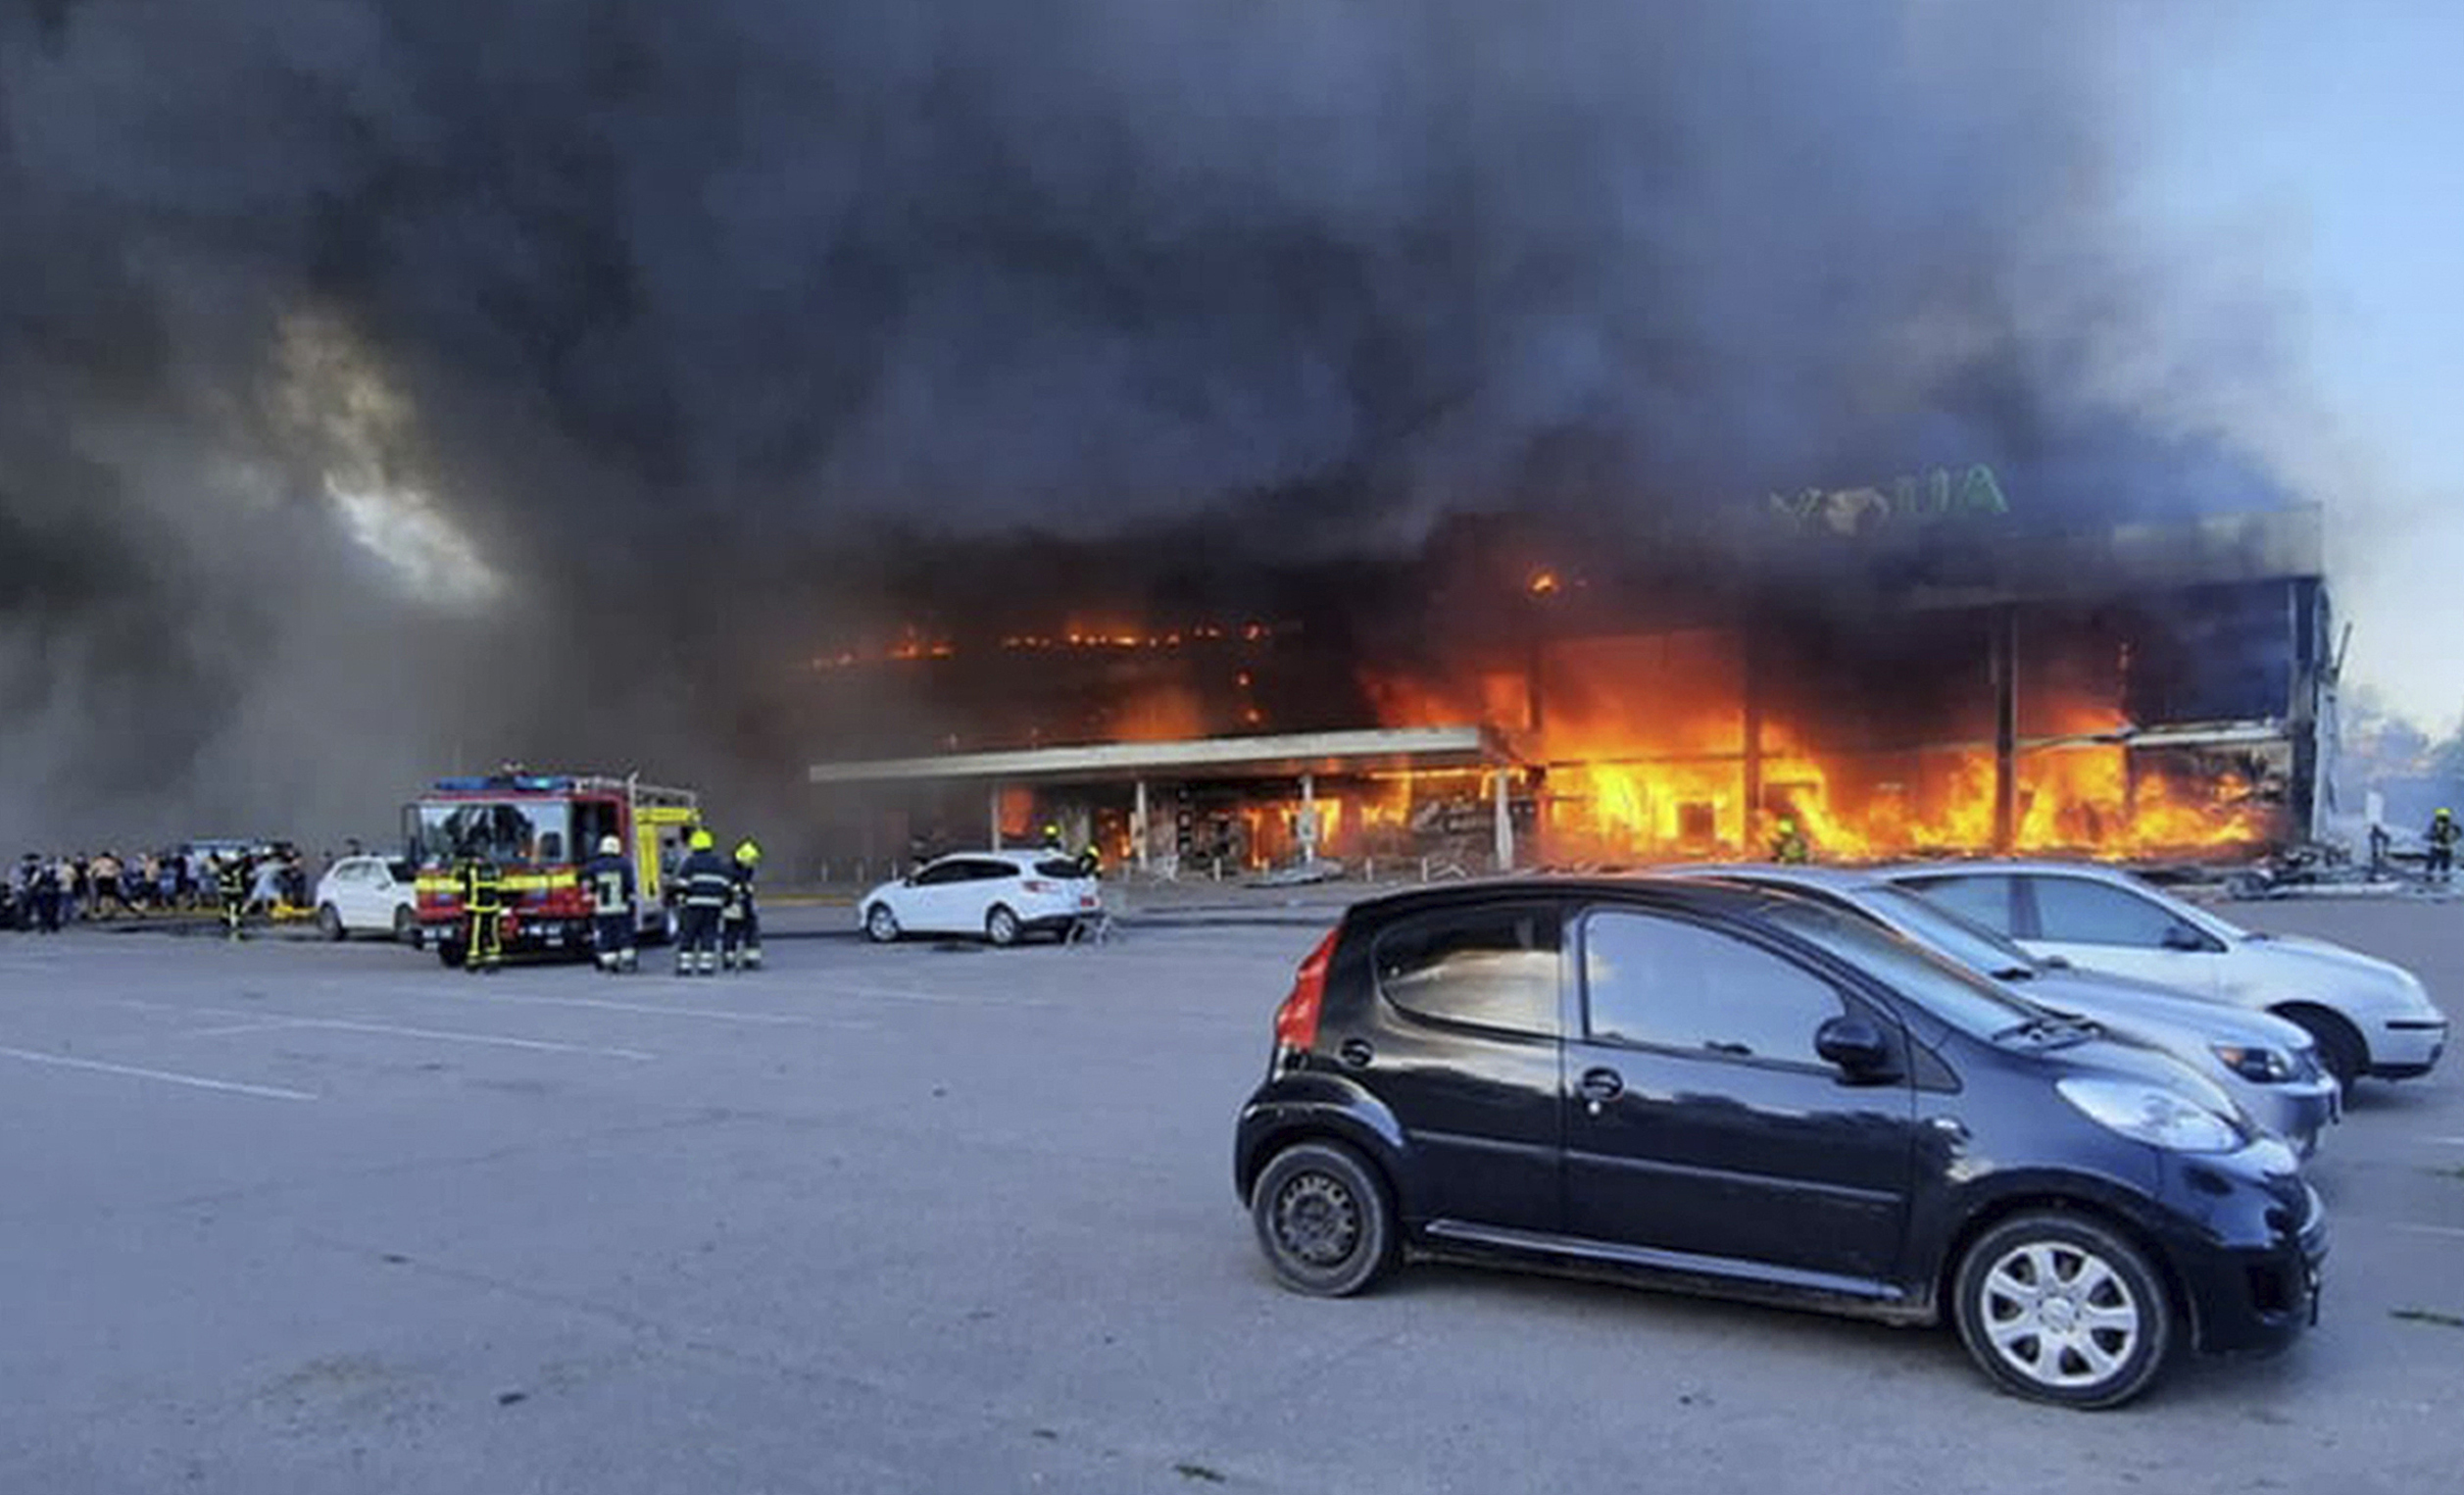 Video Shows Massive Fire at Ukraine Mall After Russian Missile Attack